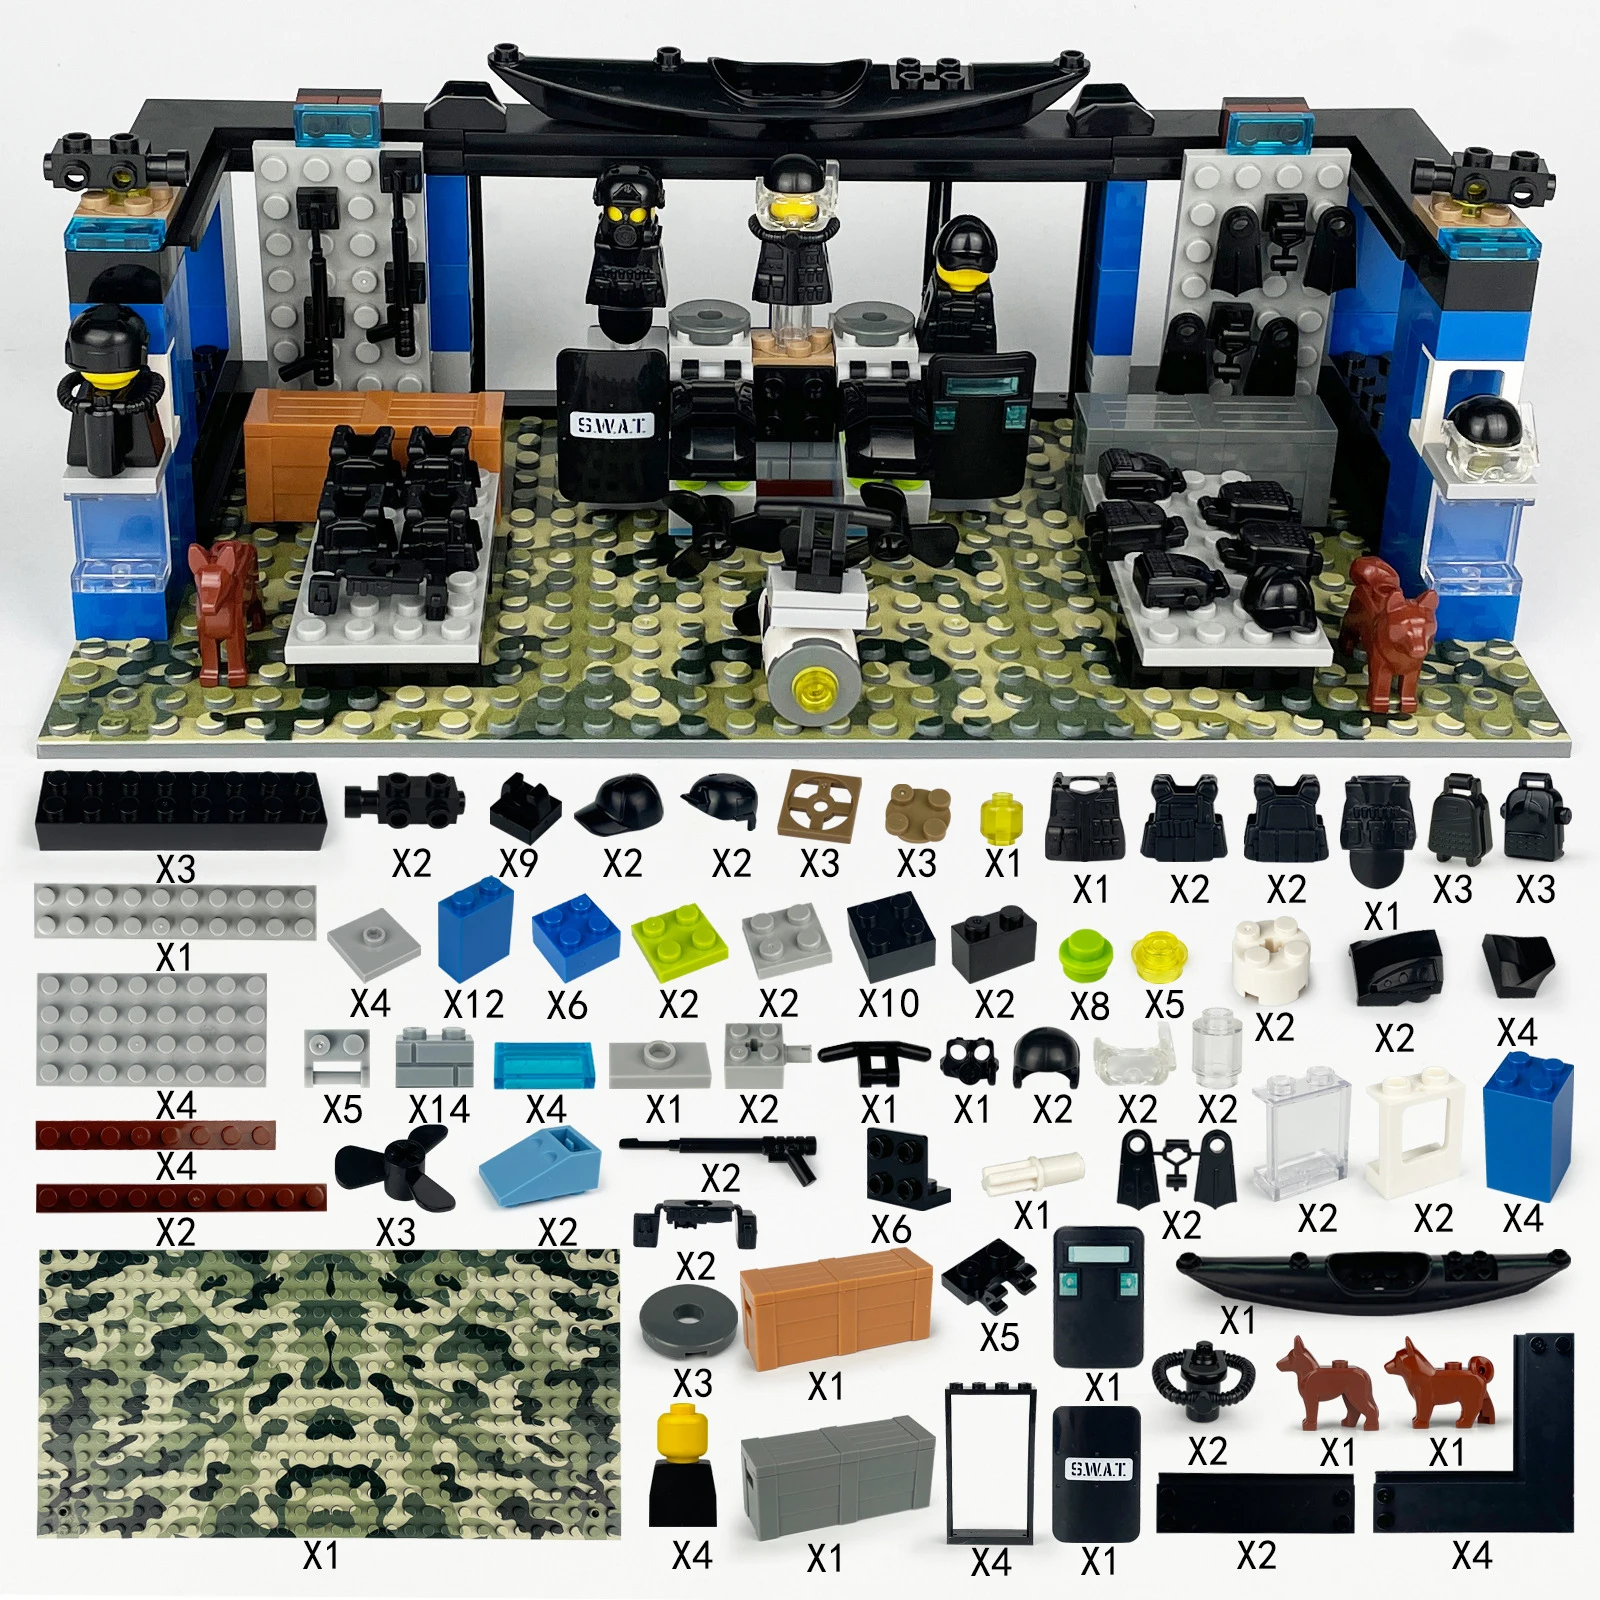 

Military Prison Weapons Depot Police Special Forces Gangster Moc Model Soldiers Machine Guns SWAT Building Blocks Jeeps Car Toys